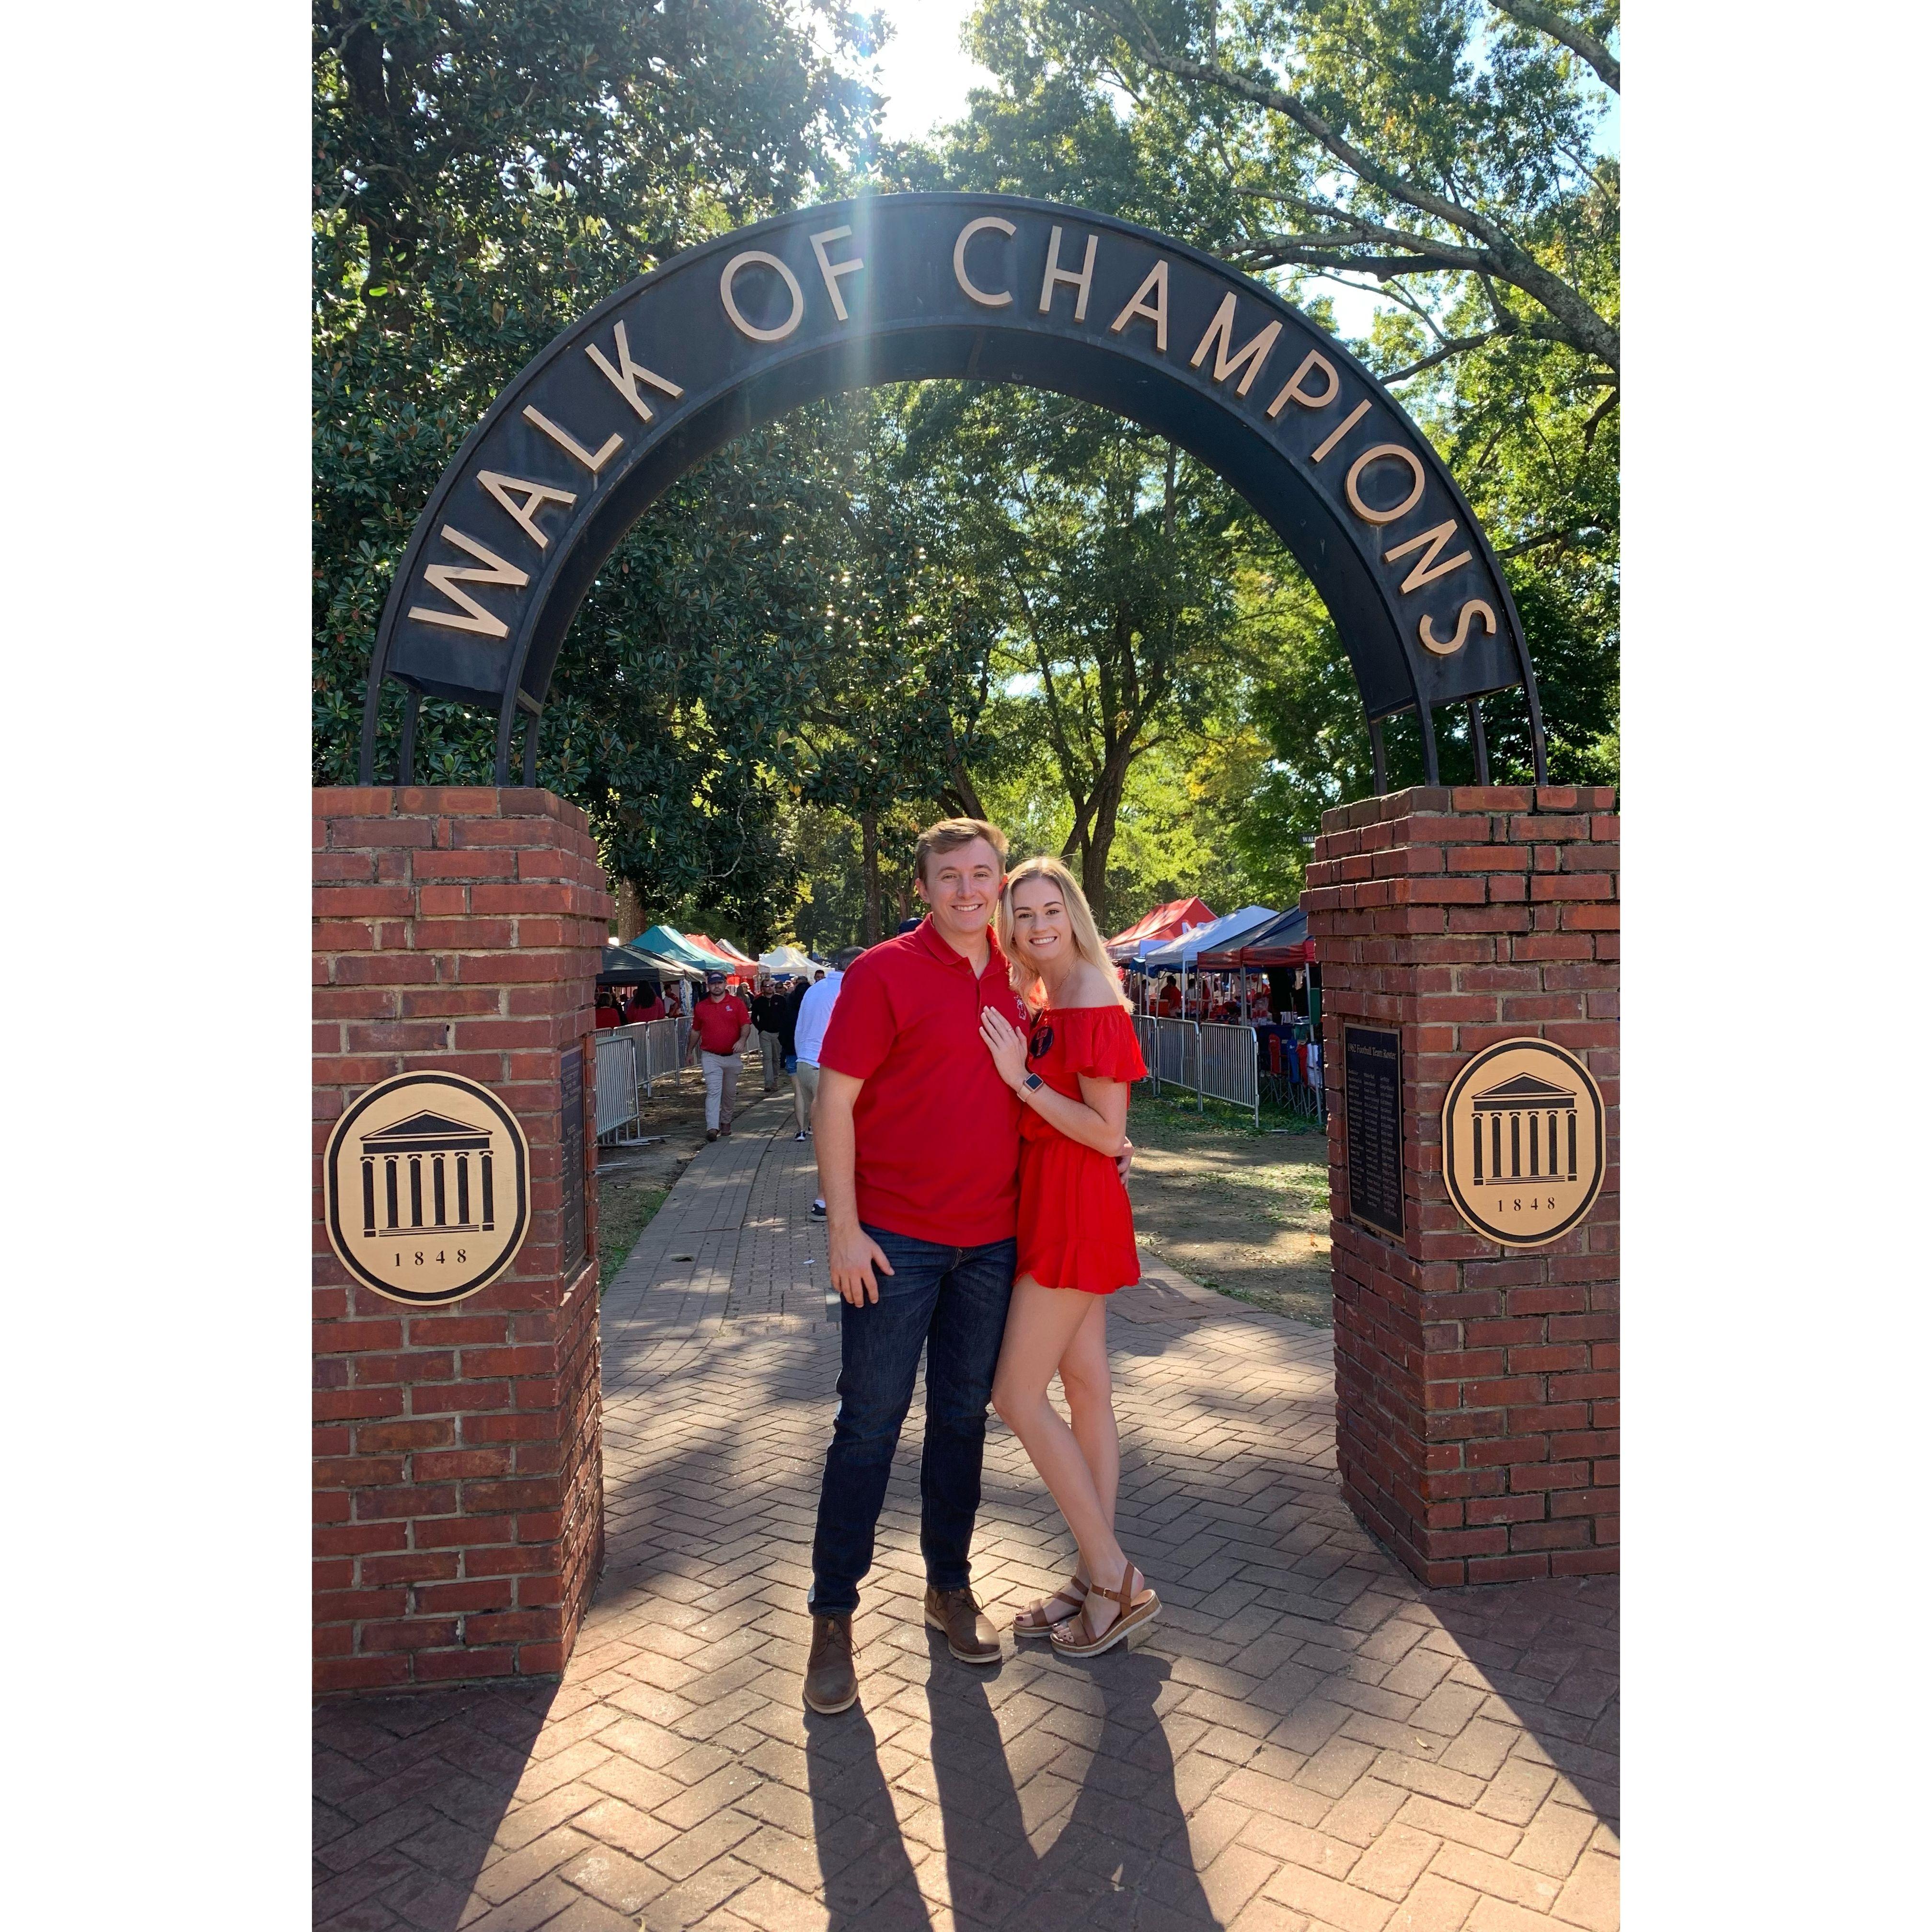 October 2021: A trip back to Oxford to cheer on Ole Miss, too!